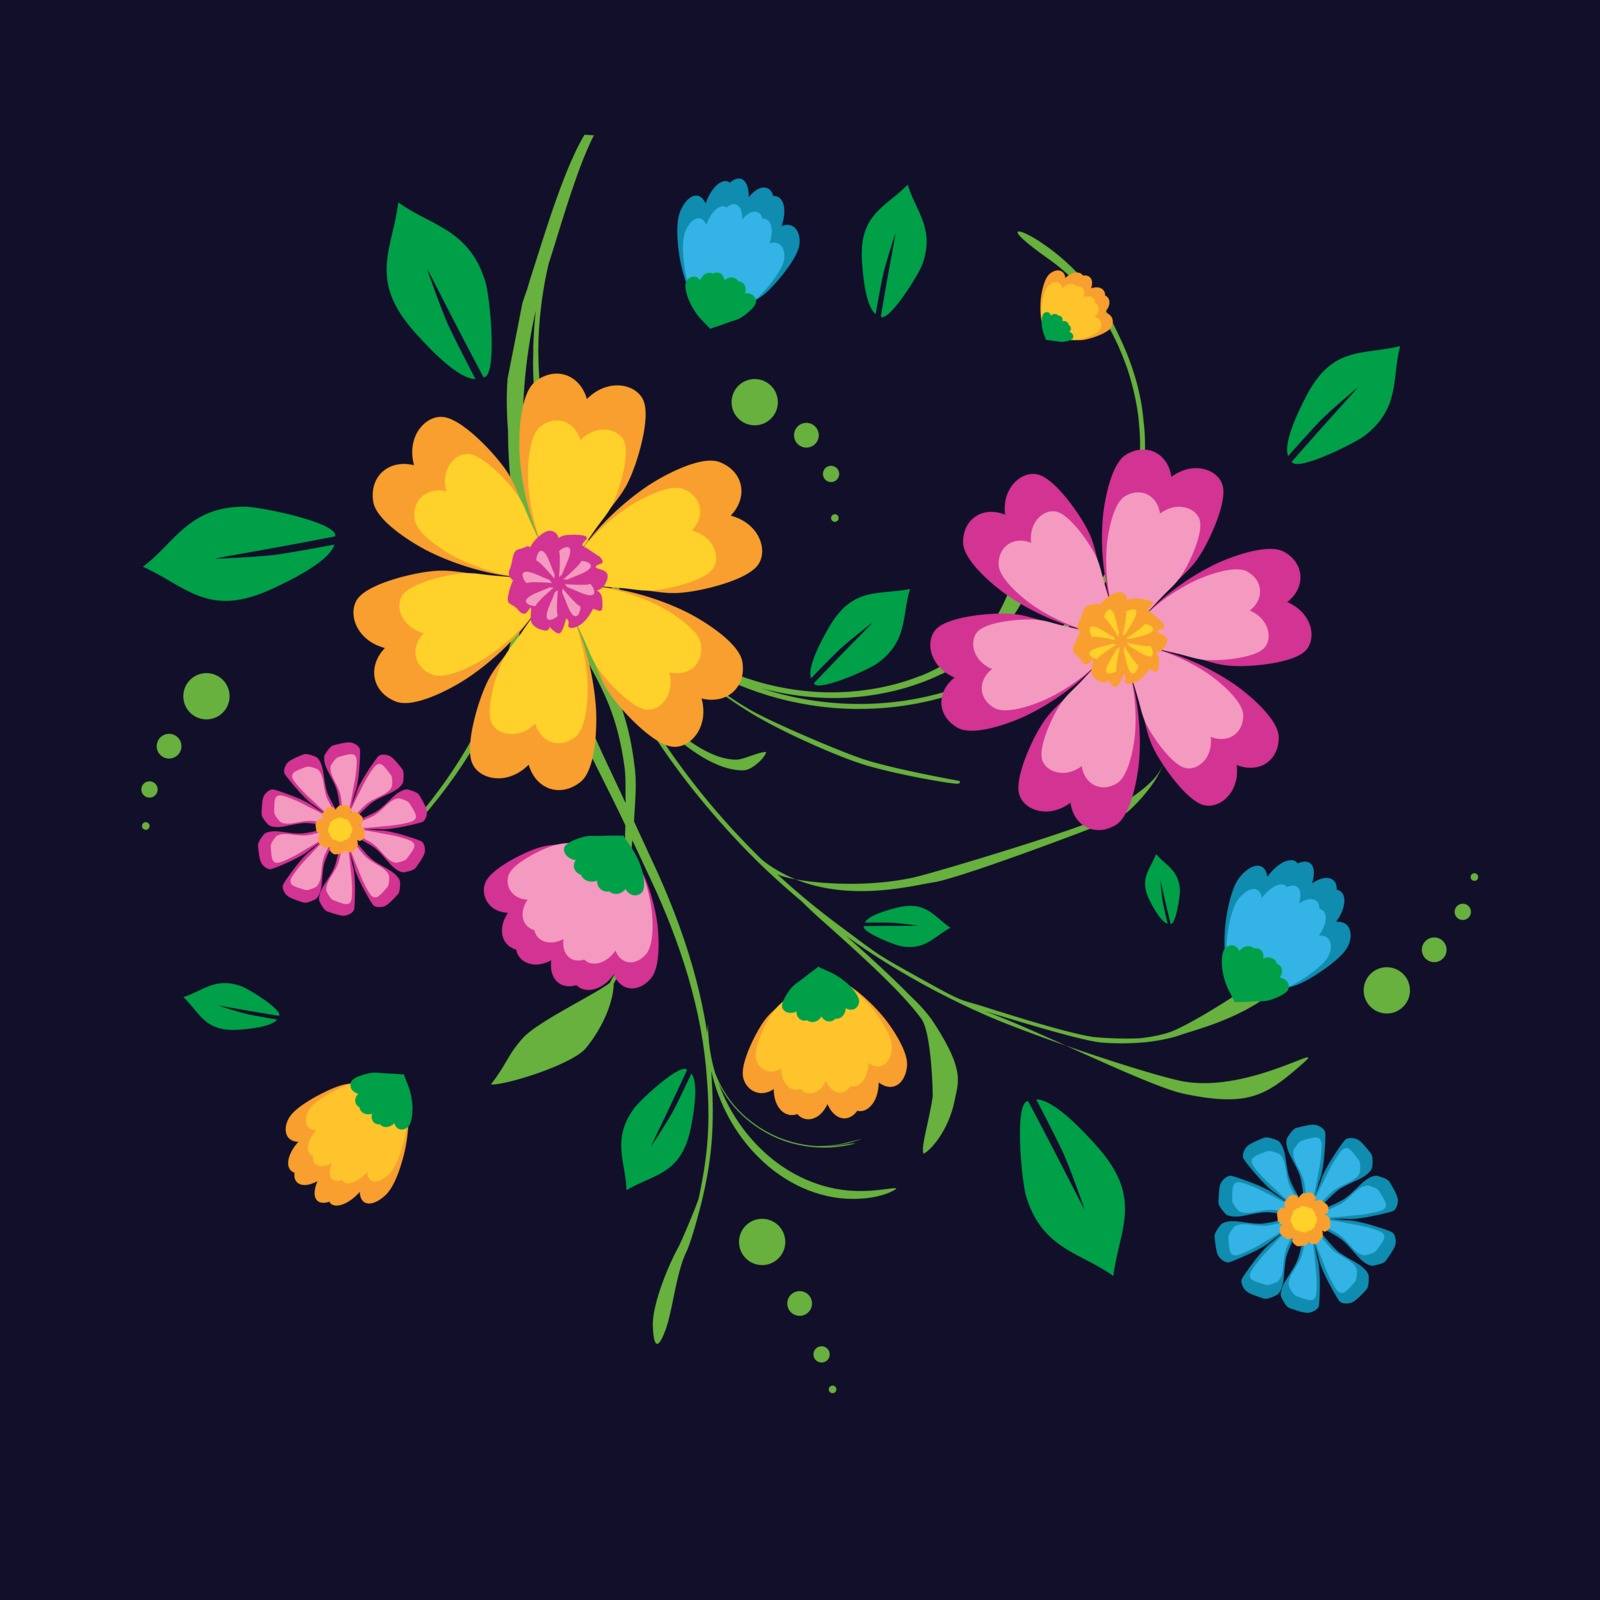 A bunch of very decorative and colorful flowers on a dark blue background